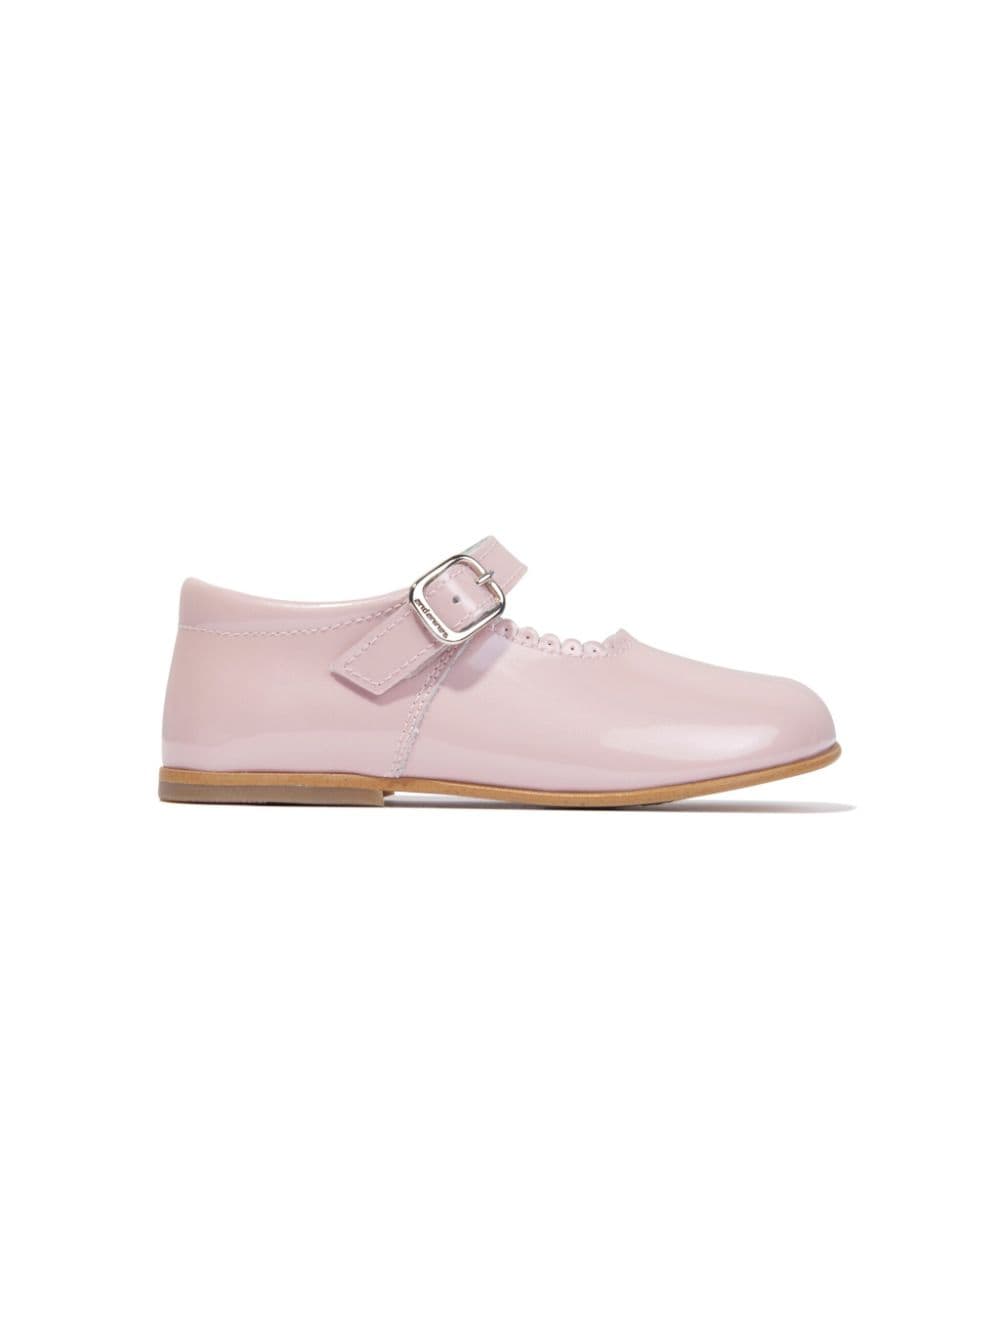 ANDANINES buckled leather ballerina shoes - Pink von ANDANINES